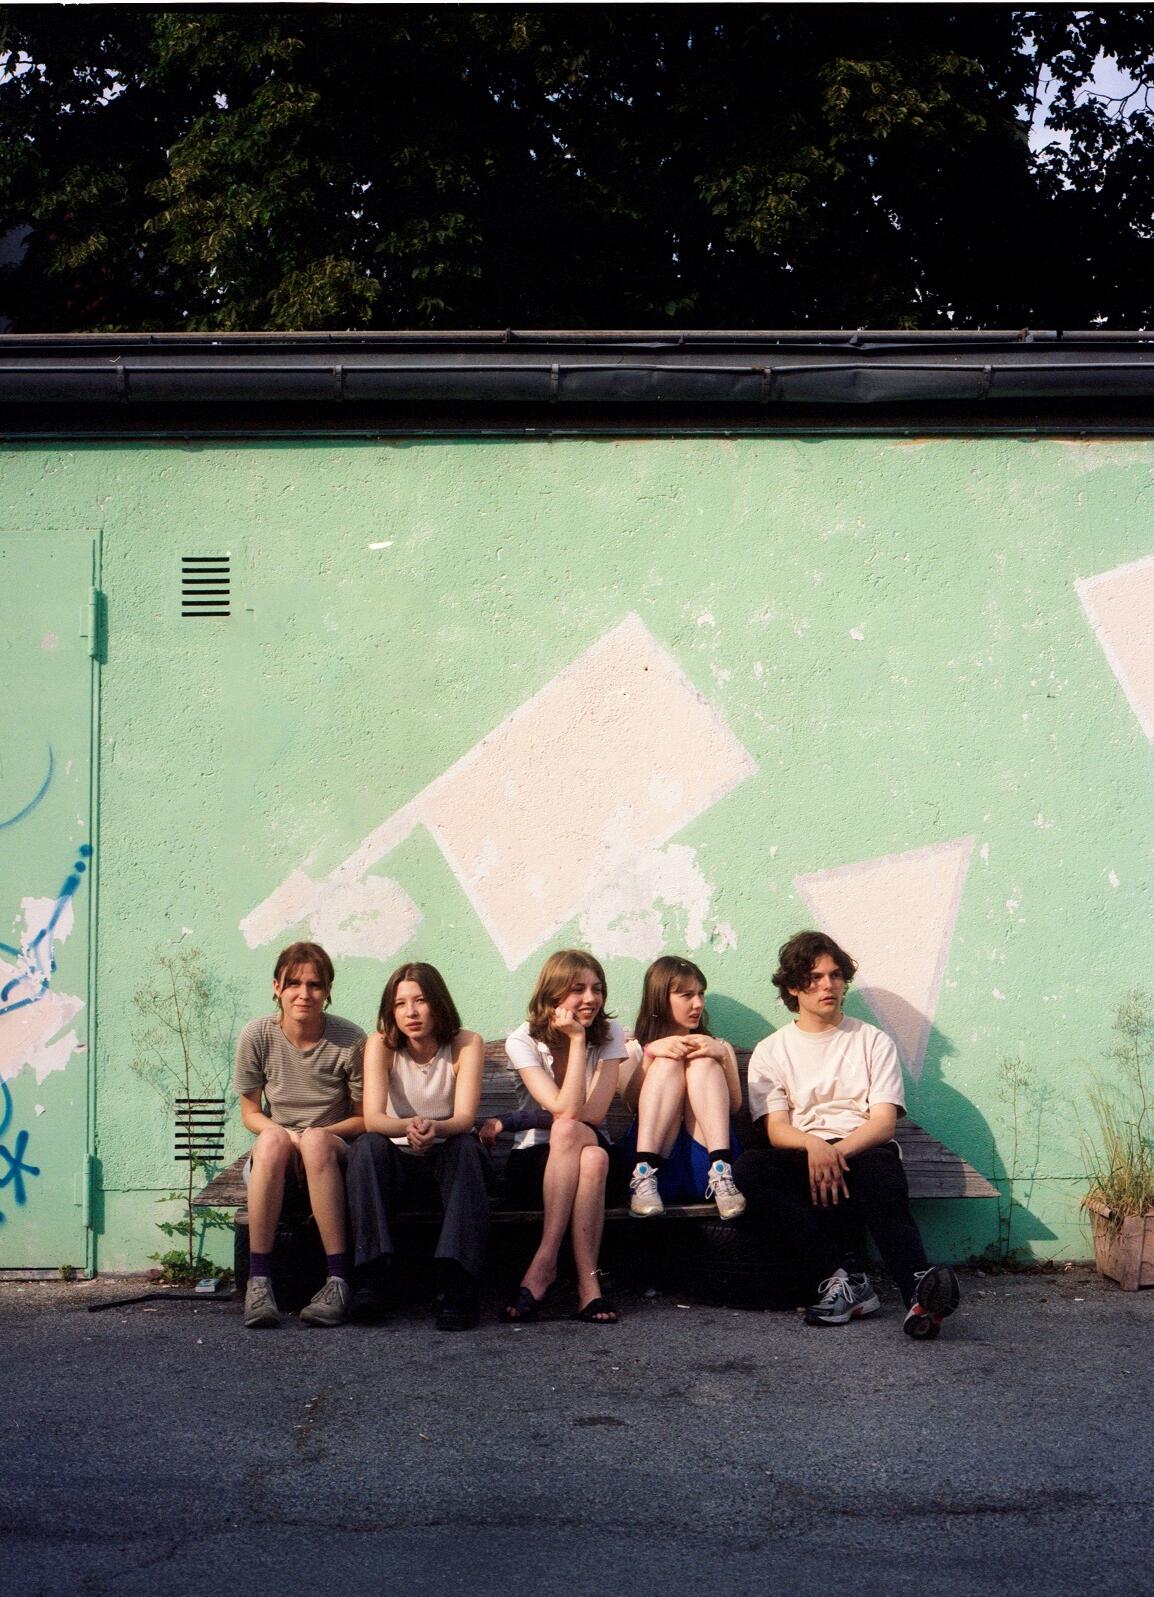 Four young women and a young man sit on a bench in front of a wall with graffiti